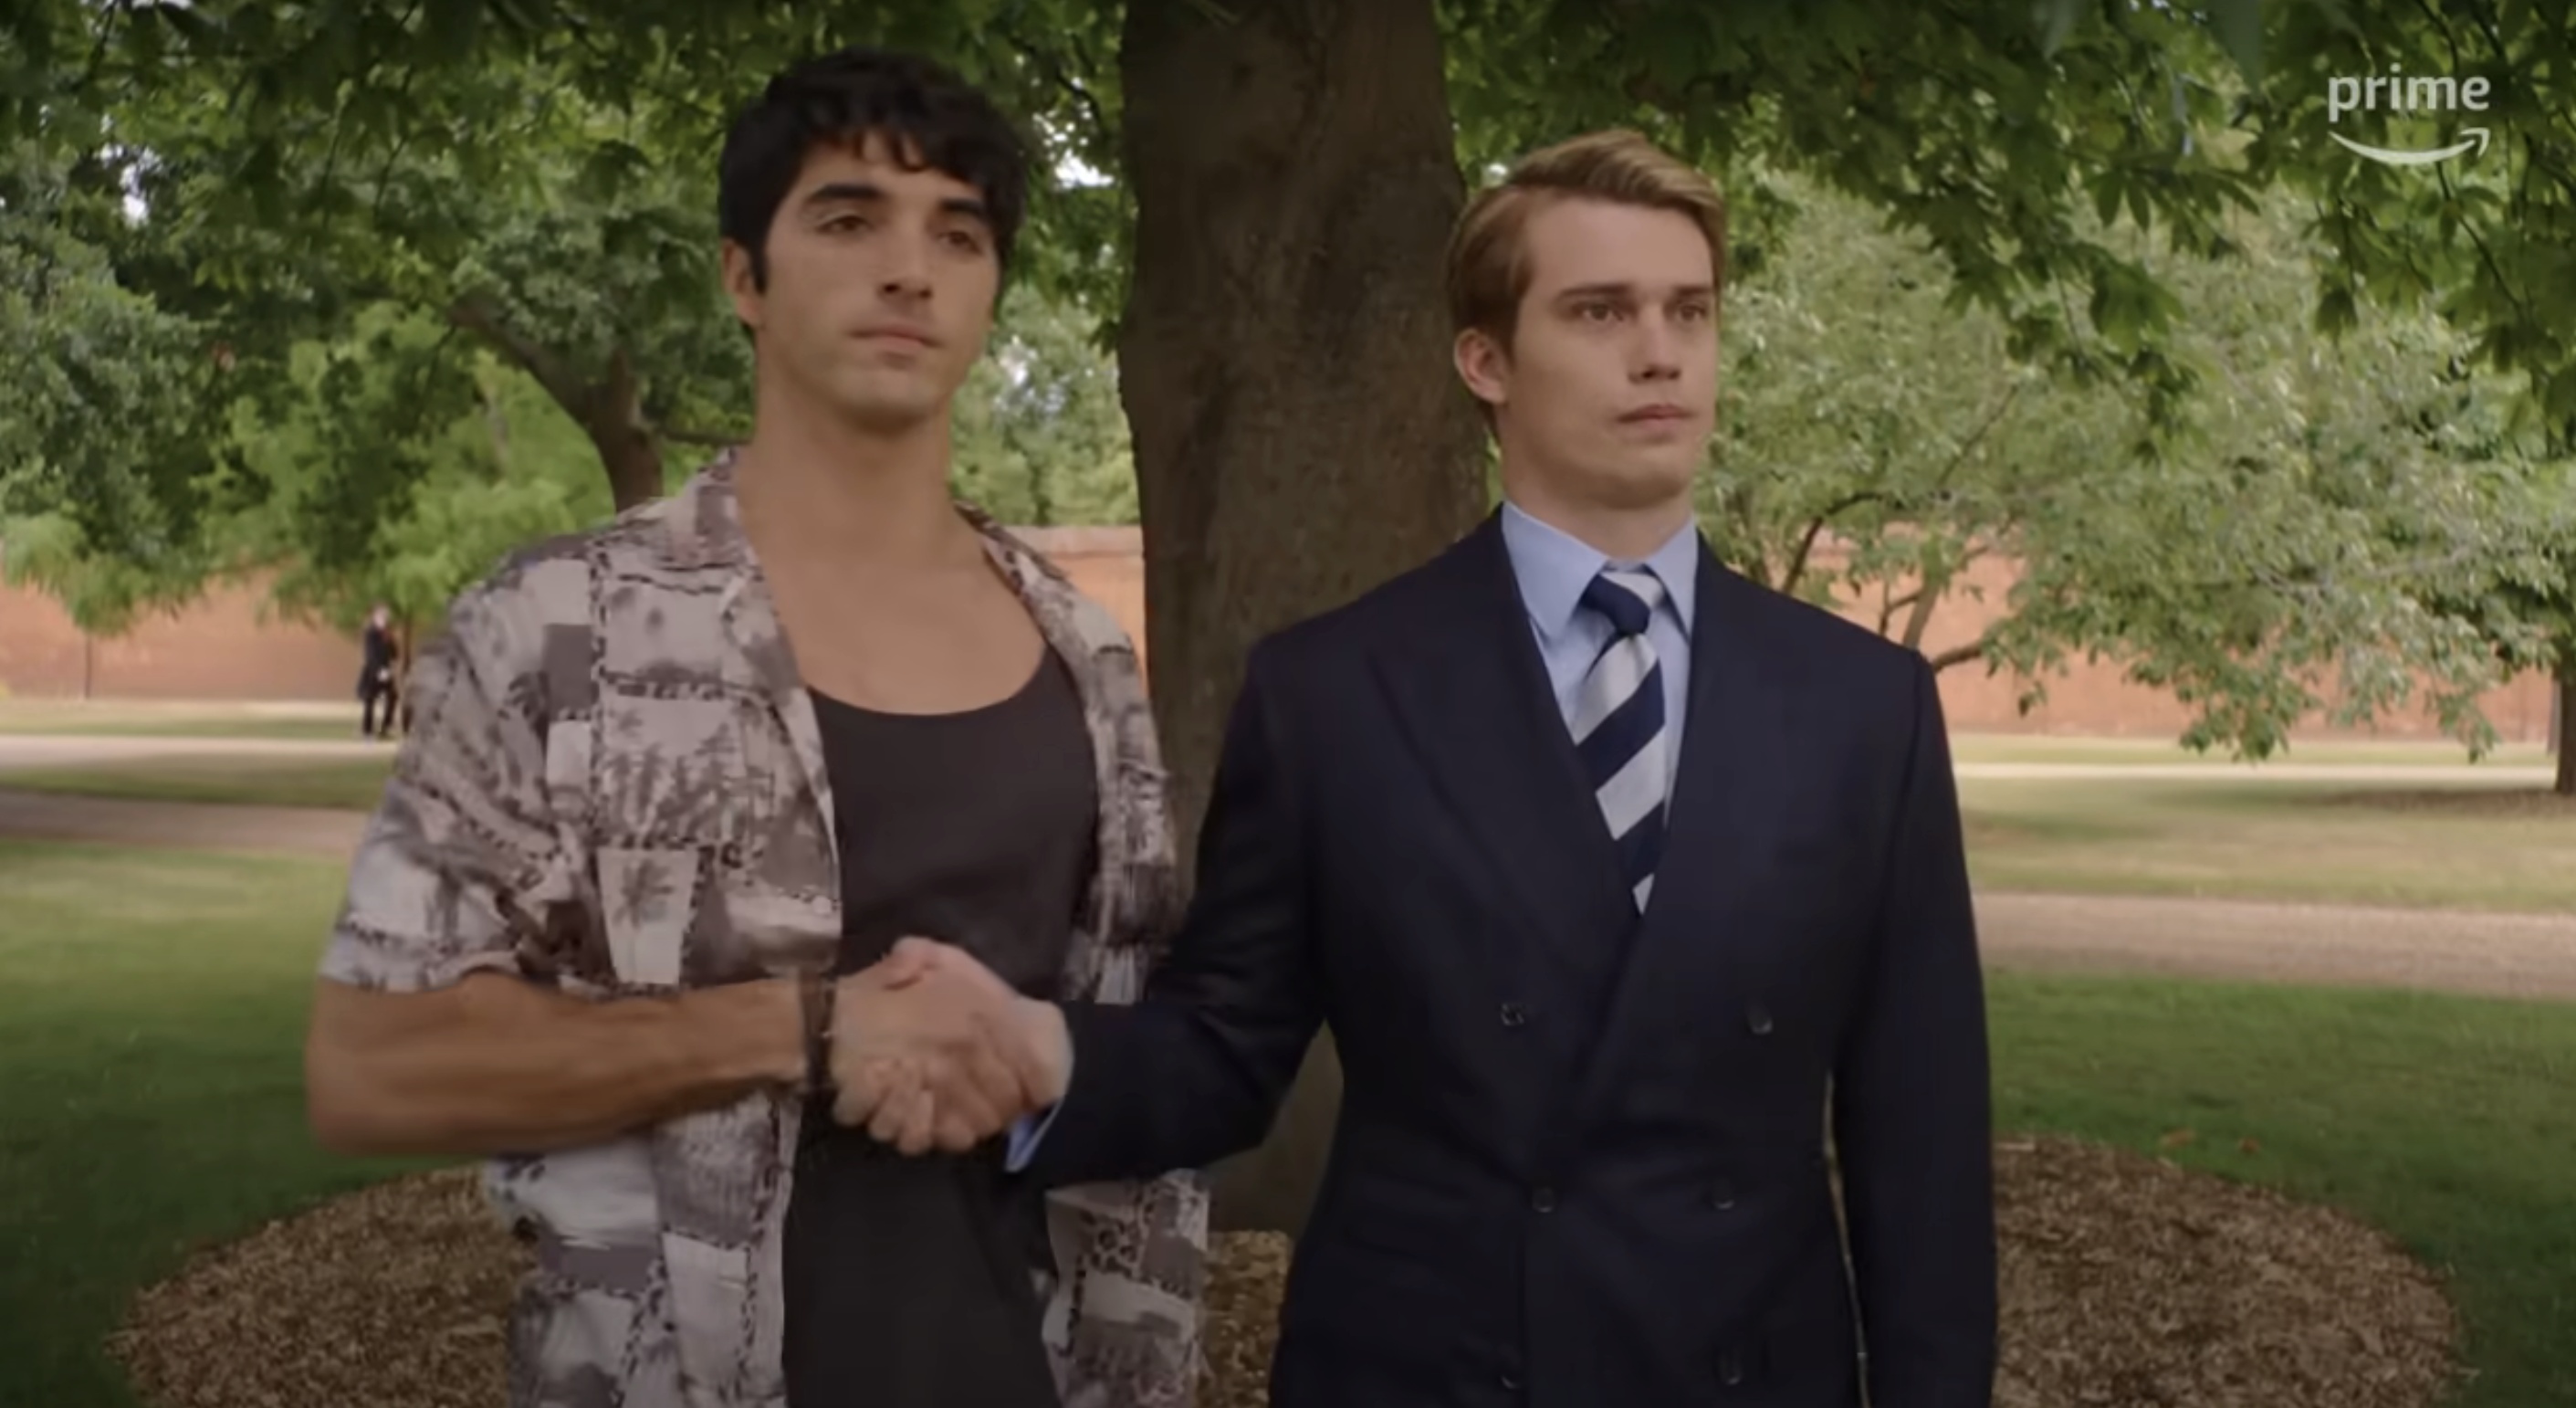 Alex casual in a patterned shirt, Henry in a suit and tie, shaking hands